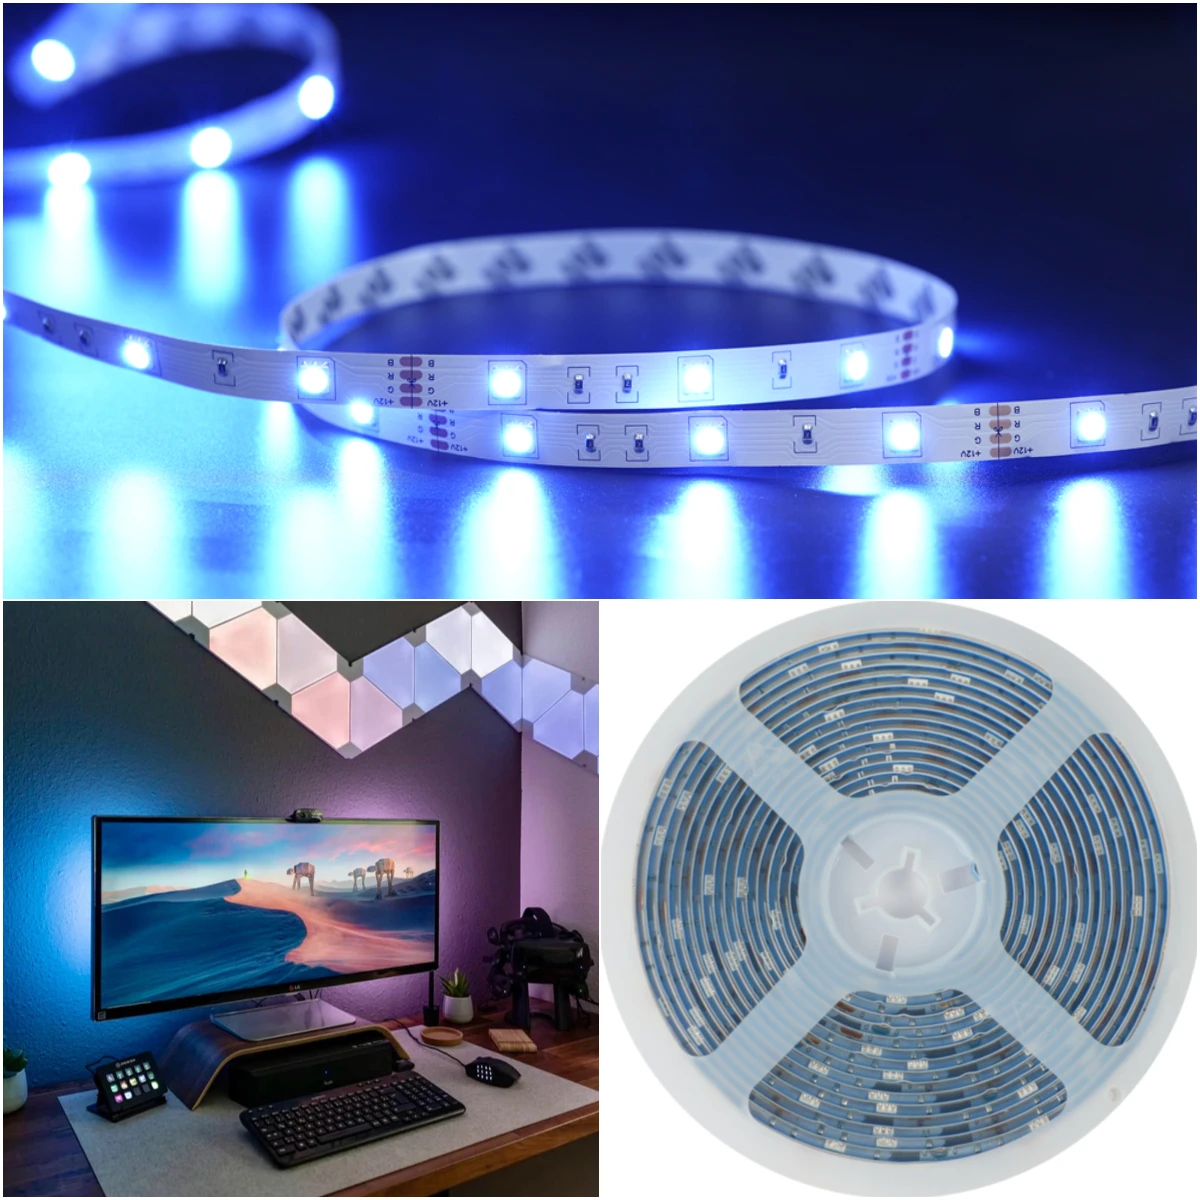 

LED Strip Lights Waterproof RGB 5050 SMD 2835 Color Changing Lamp Flexible Tape Diode Bluetooth luces led 16.4ft DC 12V For Home